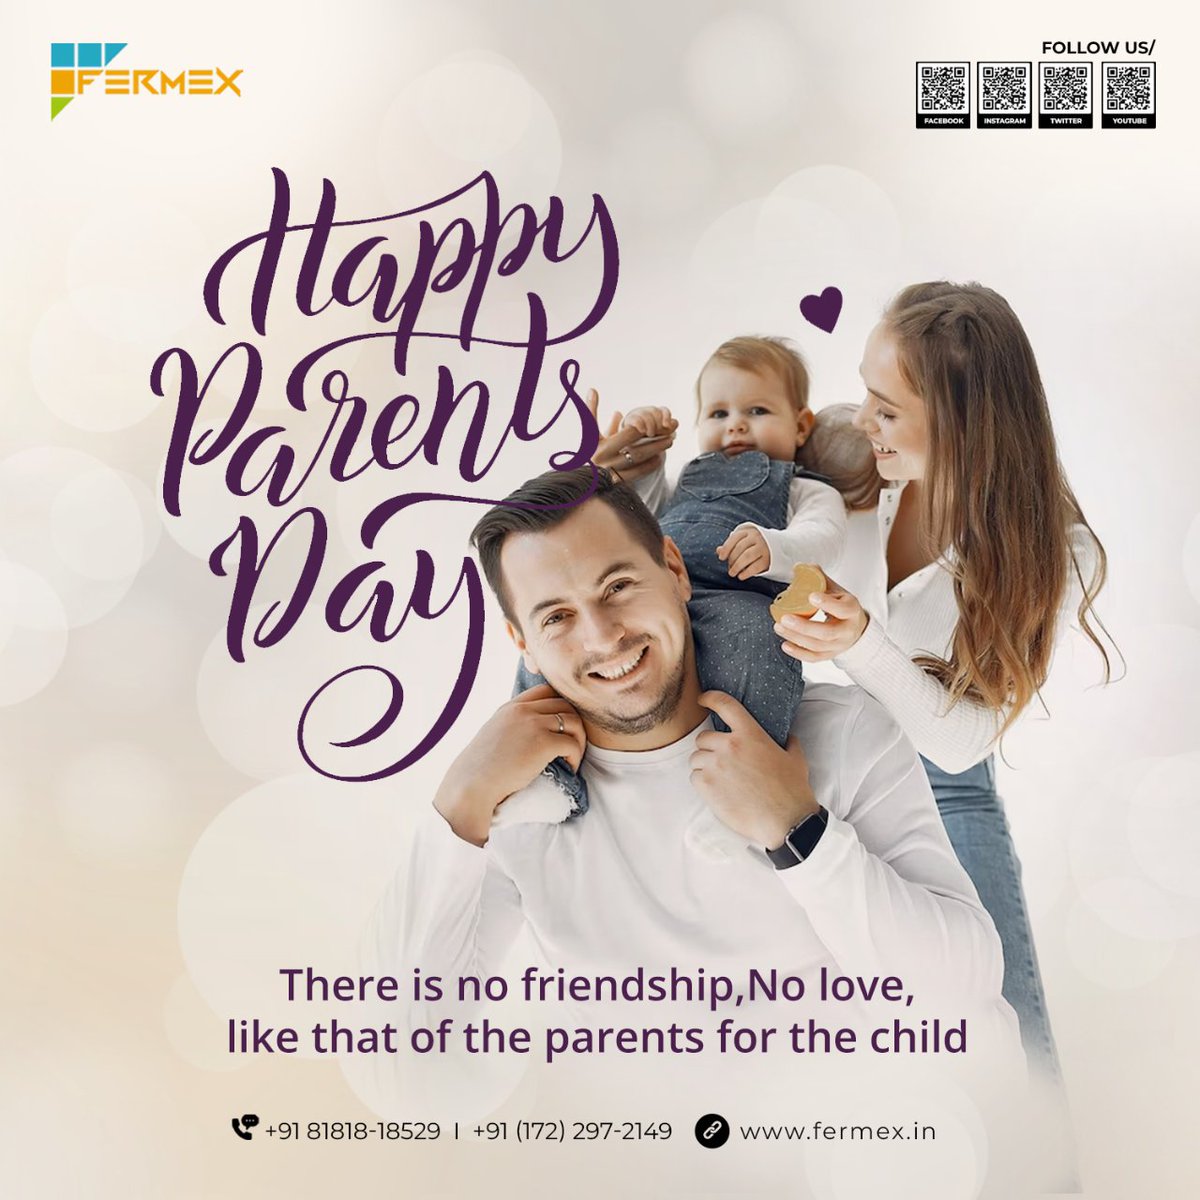 Today, we honor the guiding lights in our lives – our beloved parents! 🌟❤️ Celebrating World Parents Day with gratitude for their unwavering love, sacrifices, and endless inspiration. 

#ParentsDay  #FamilyForever #fermex